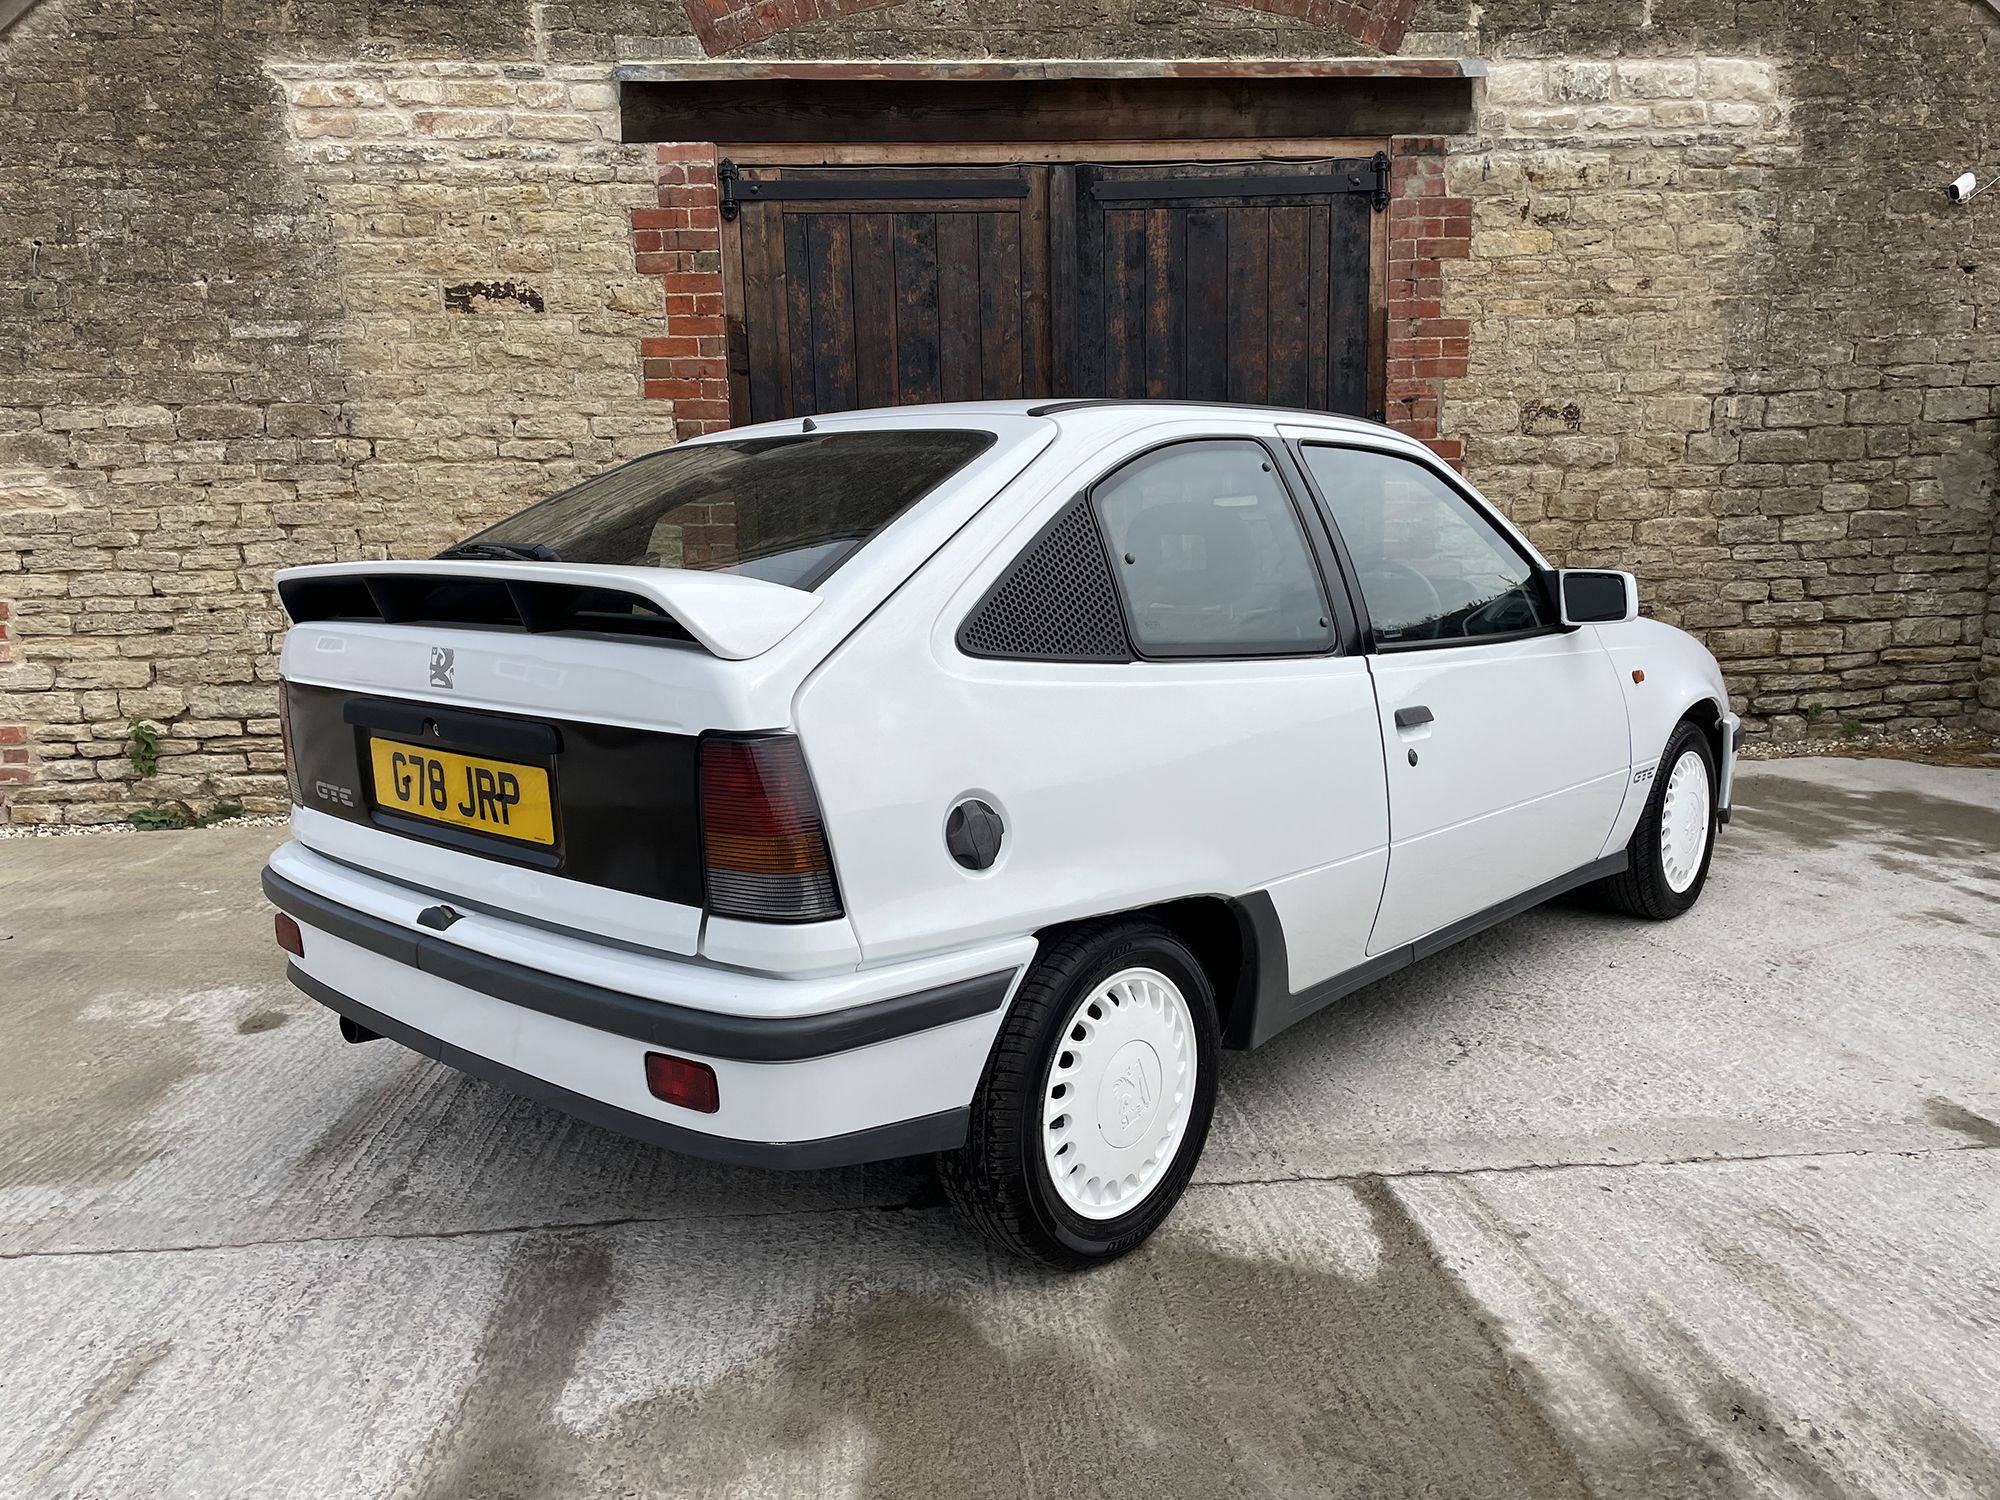 1989 Vauxhall Astra GTE 8V Reg. no. G78 JRP Chassis no. W0L000043LE112697 - Image 6 of 18